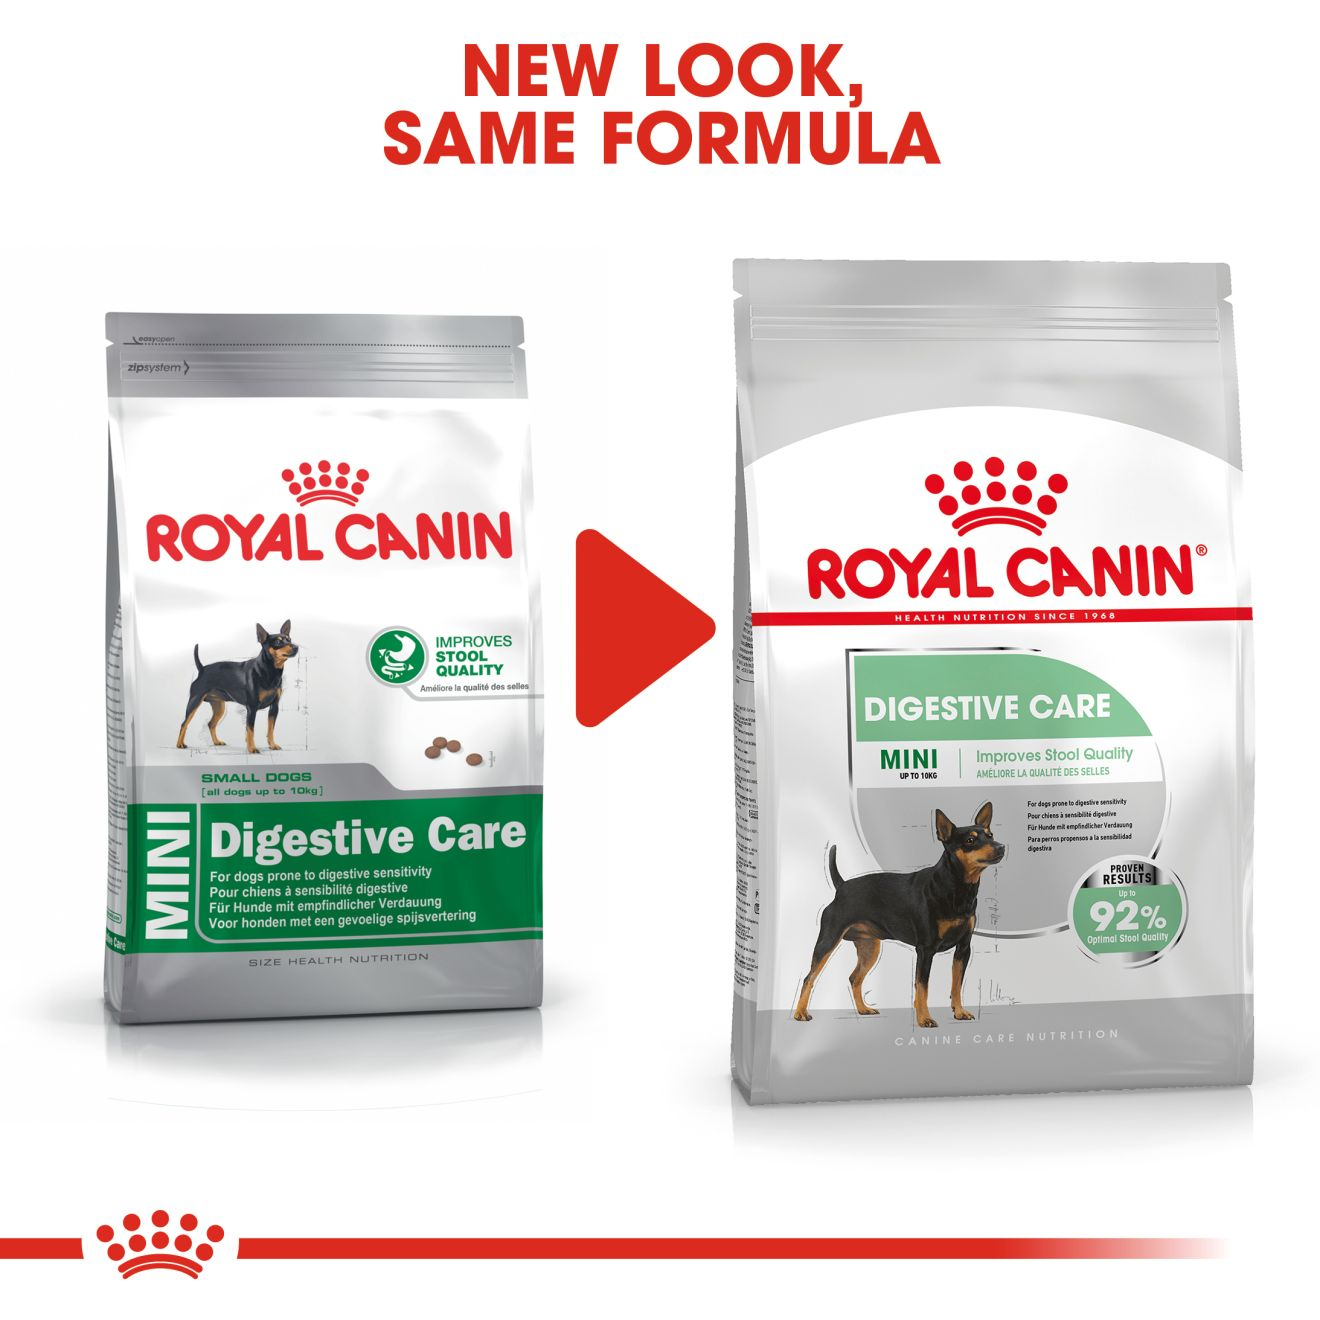 ROYAL CANIN &#x2122; CANINE CARE NUTRITION Mini Digestive Care Dry Pet Food for Dog